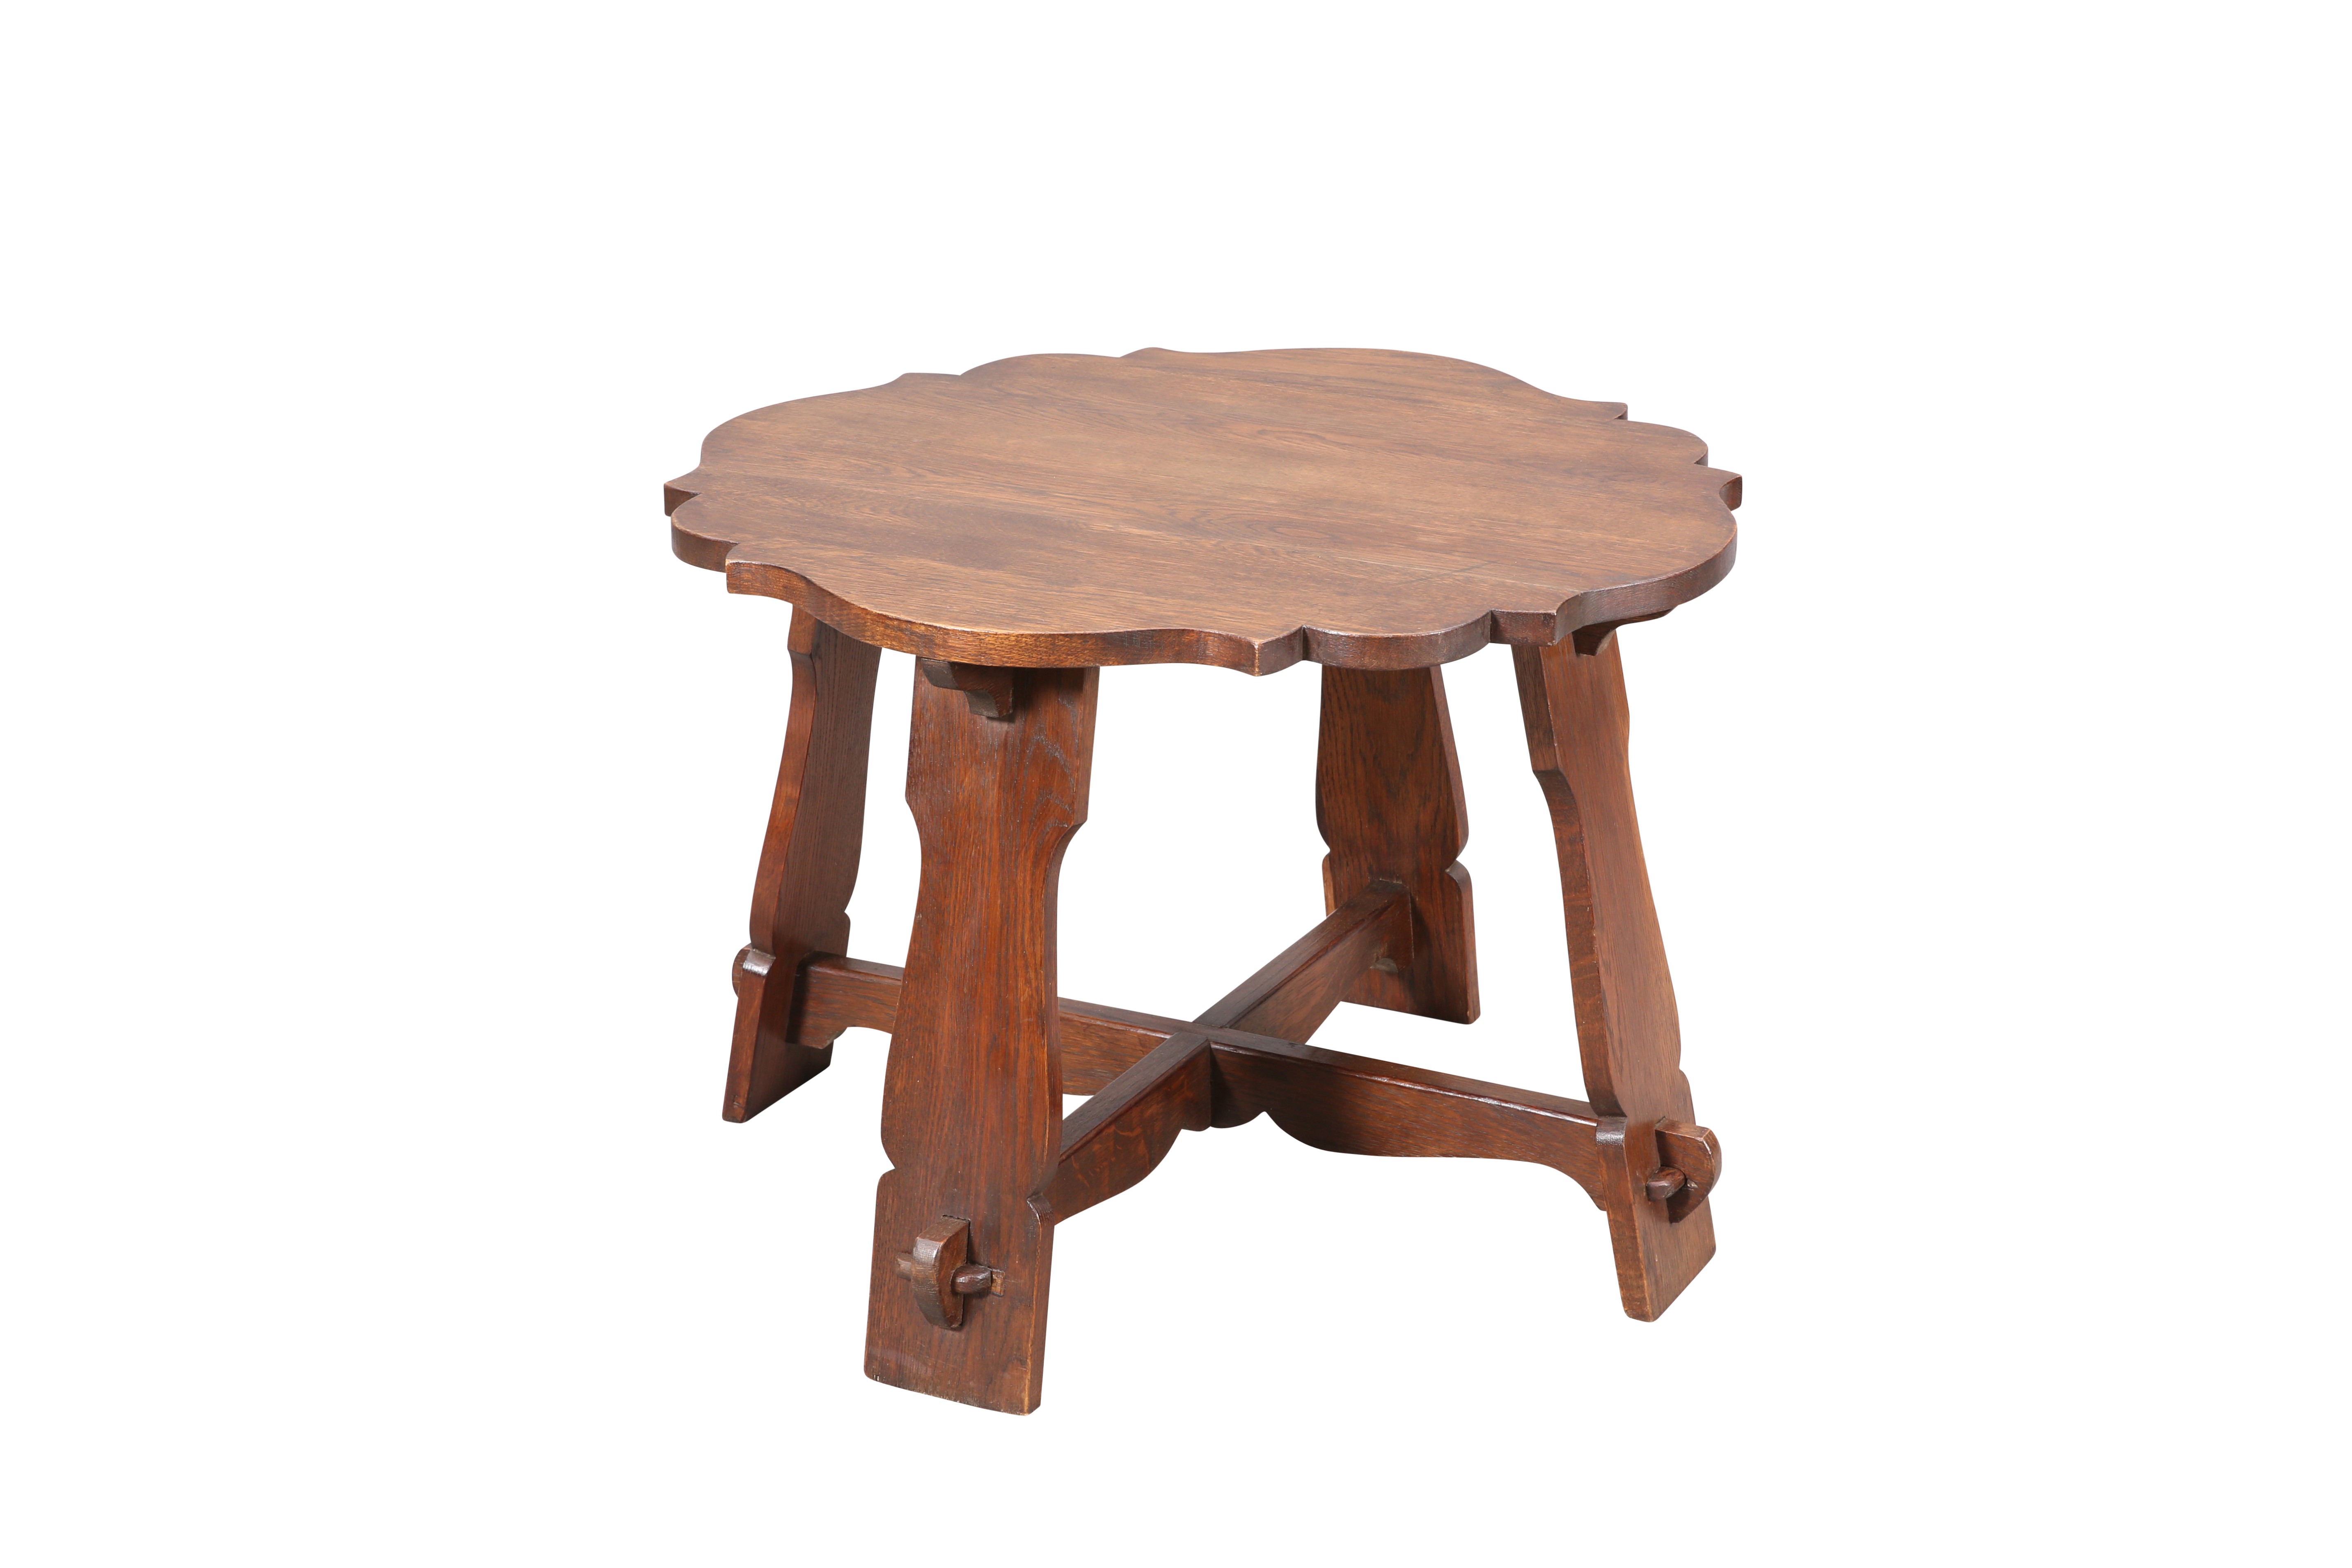 AN ARTS AND CRAFTS OAK OCCASIONAL TABLE